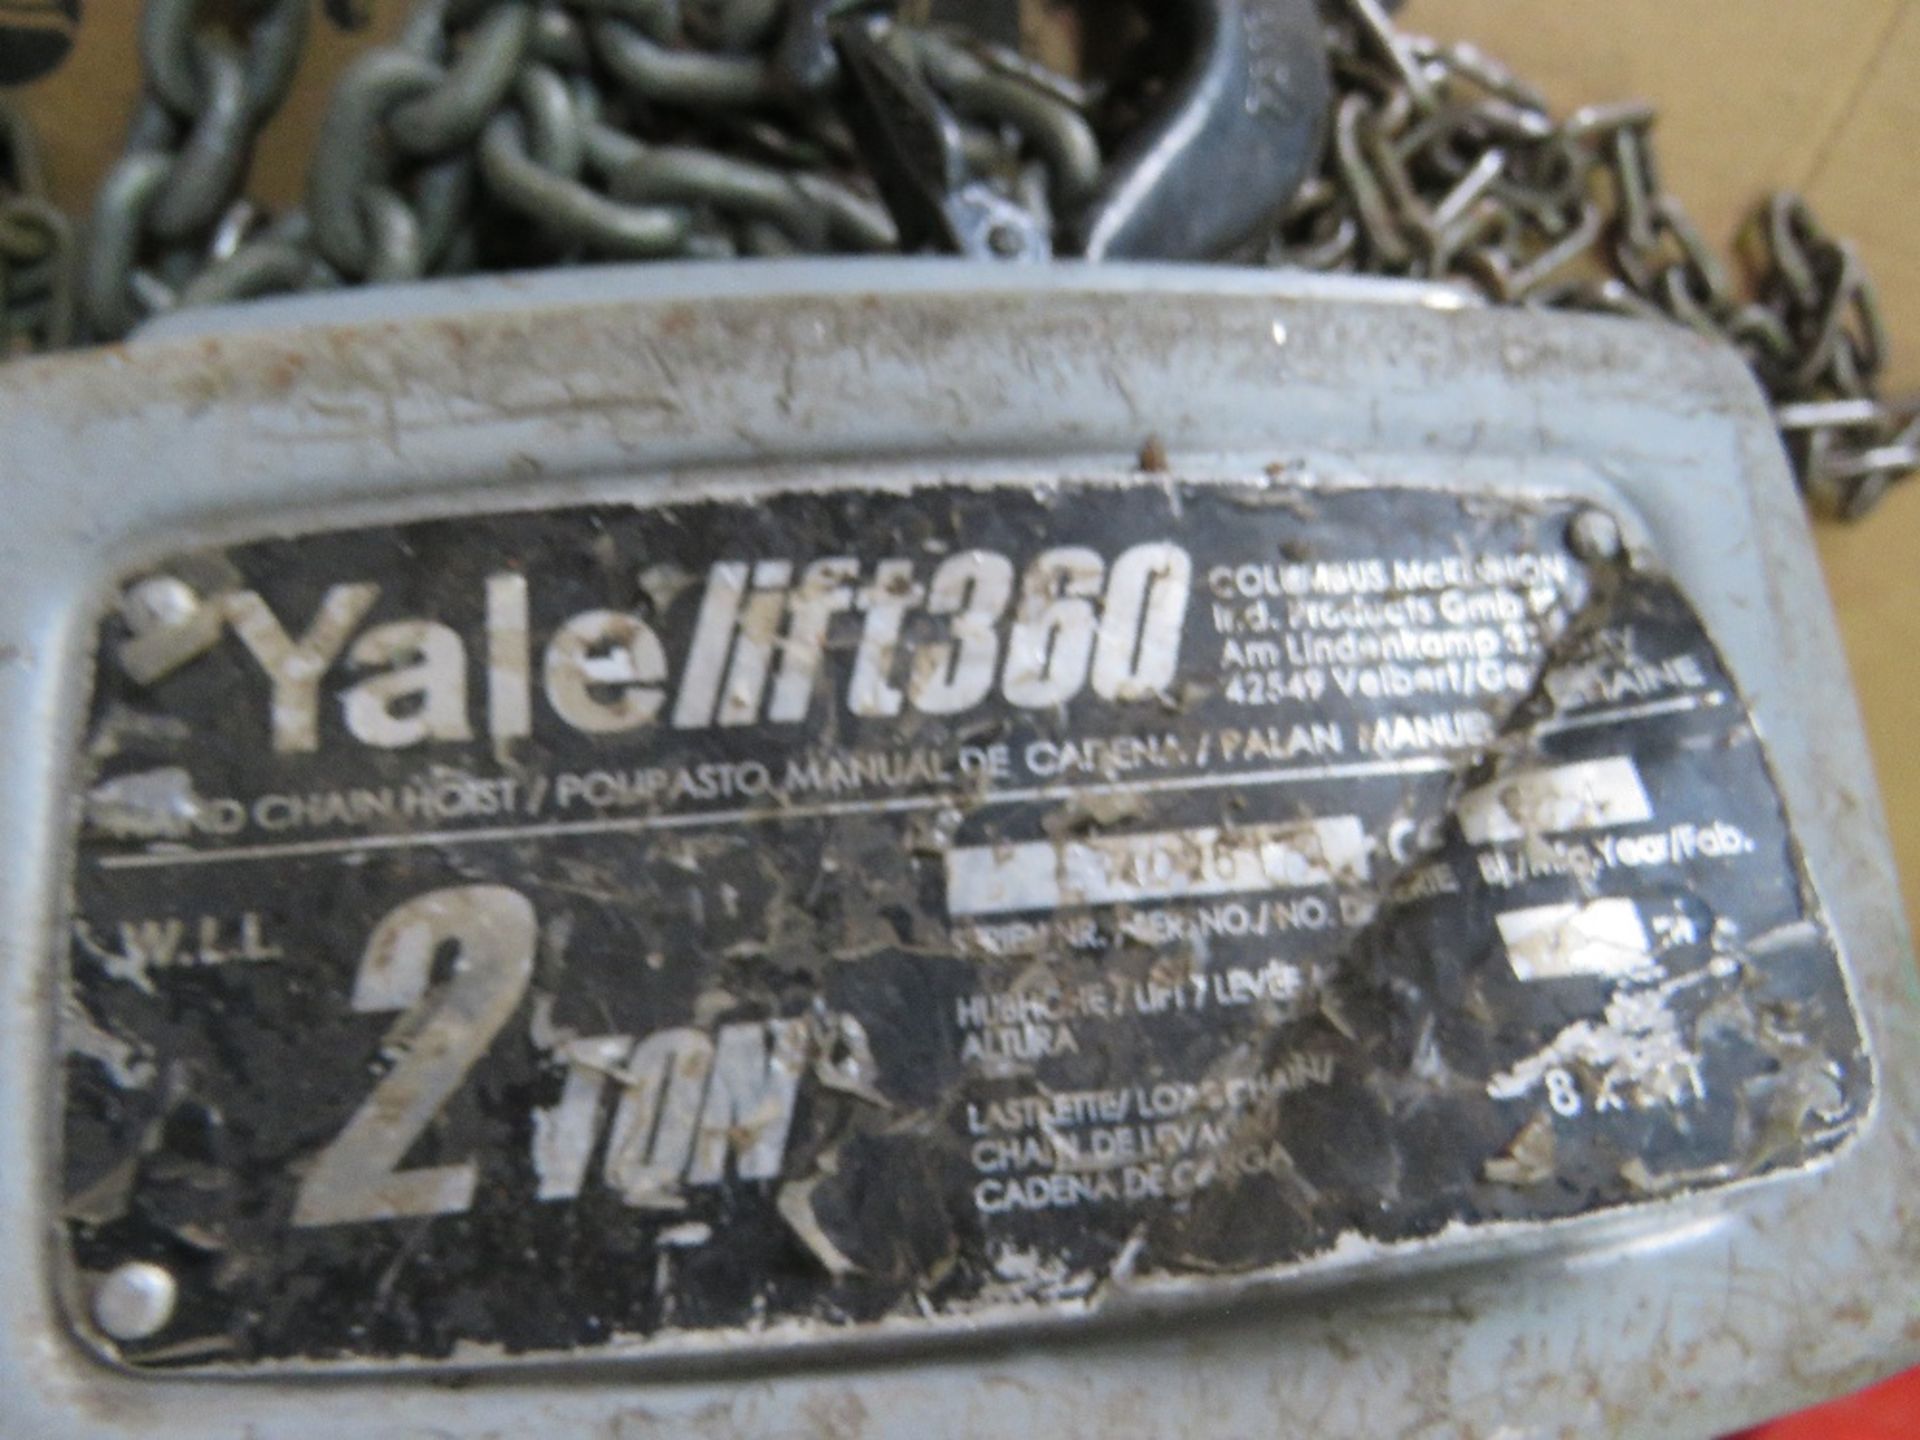 2 X YALE CHAIN HOISTS: 1TONNE AND 2 TONNE RATED. - Image 3 of 3